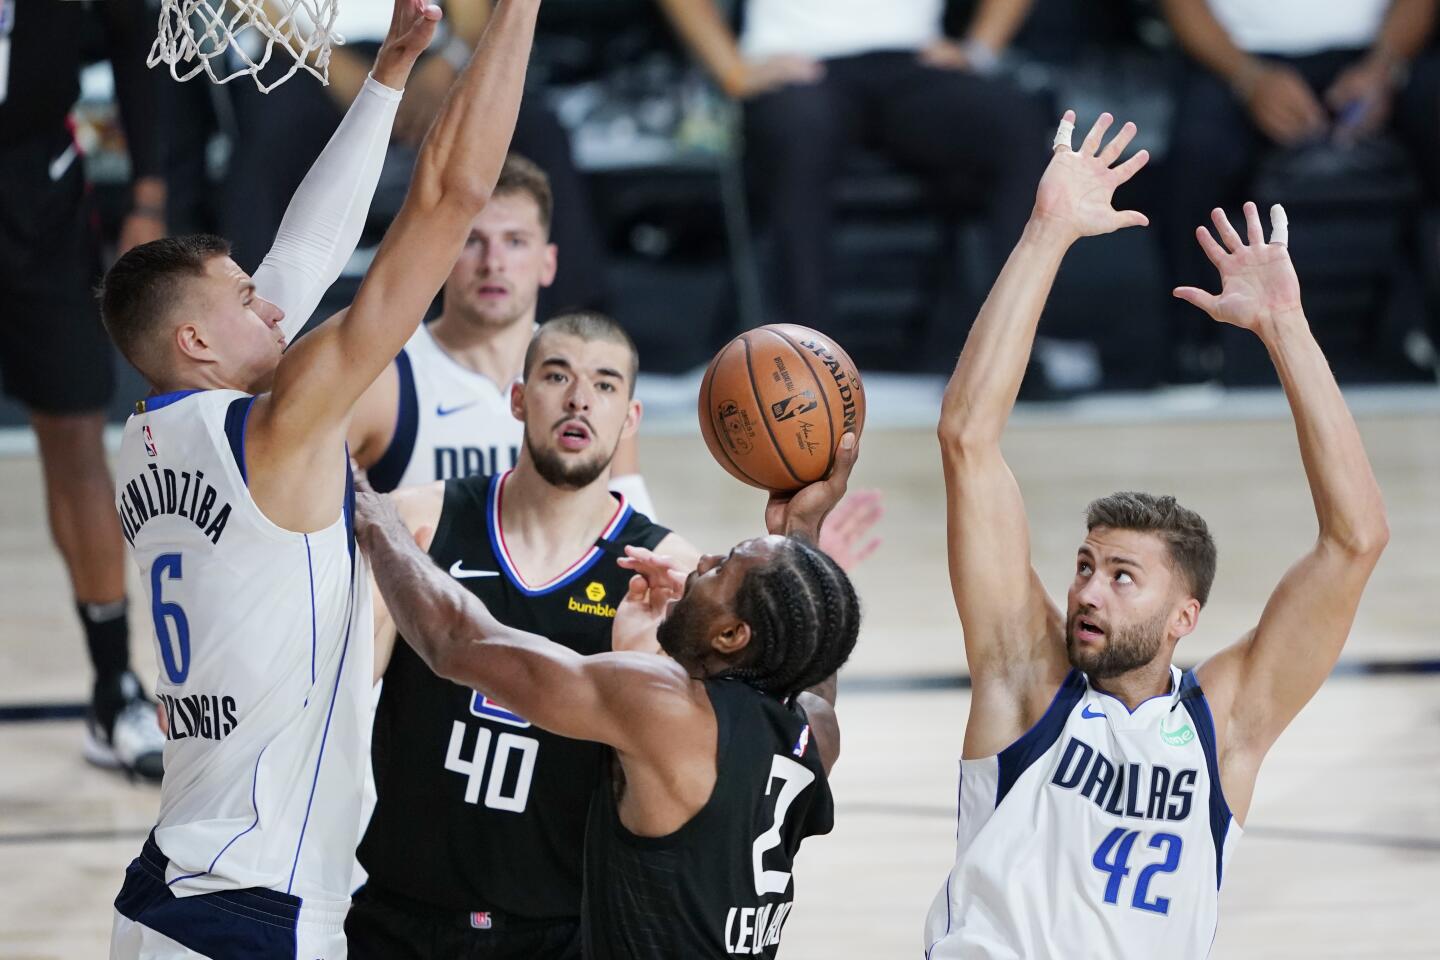 Clippers-Mavs: 5 takeaways as Mavs grab upper hand - Bench Contribution for the Mavs